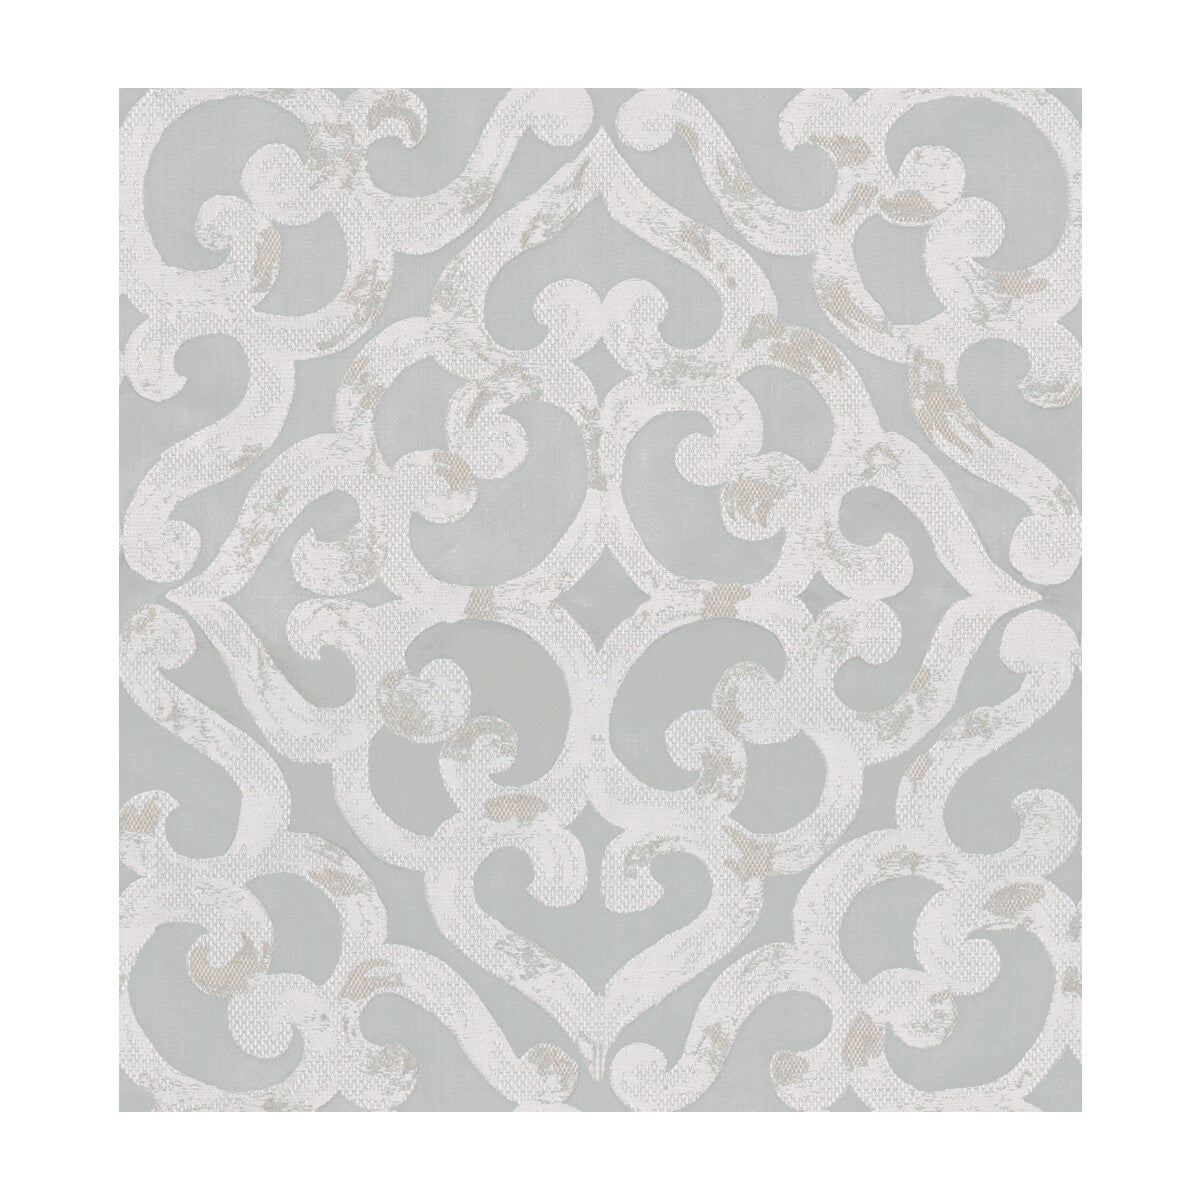 Kurrajong fabric in seaglass color - pattern 33799.16.0 - by Kravet Design in the Candice Olson collection